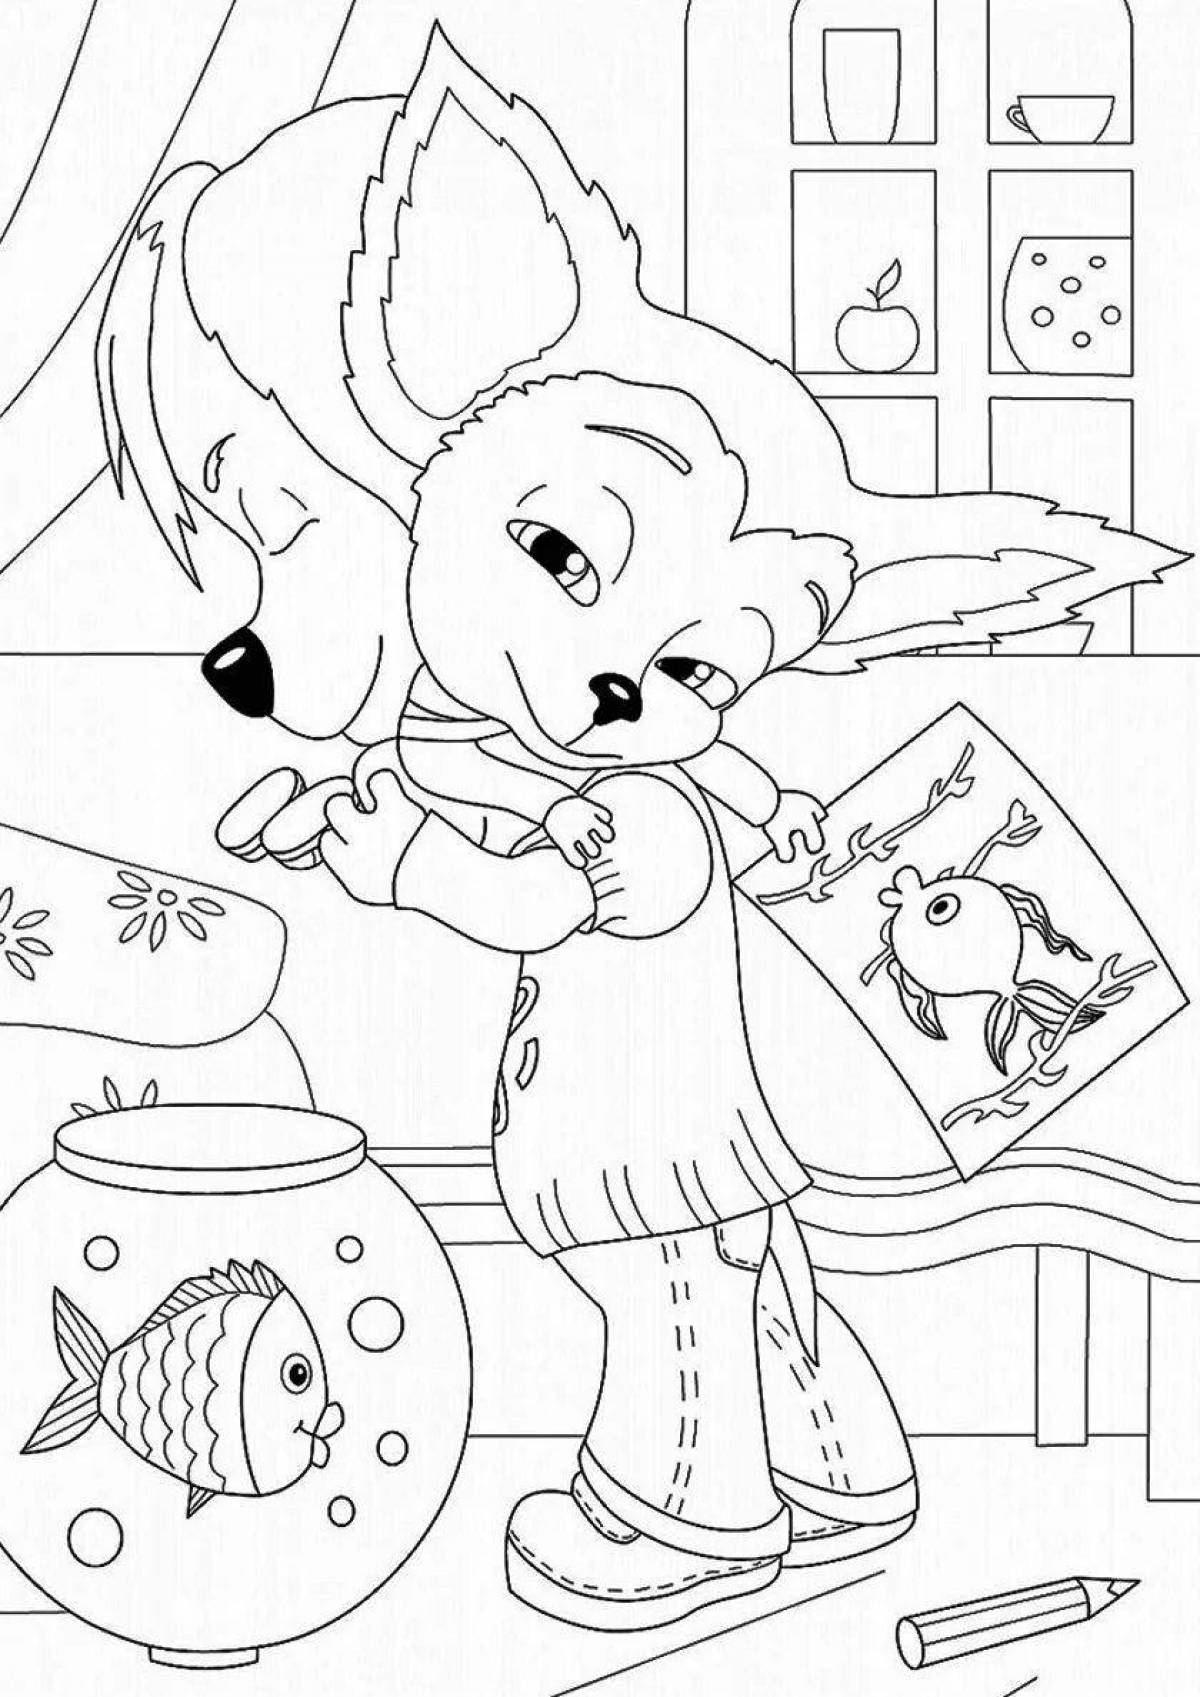 Color creative barboskiny coloring book for children 5-6 years old